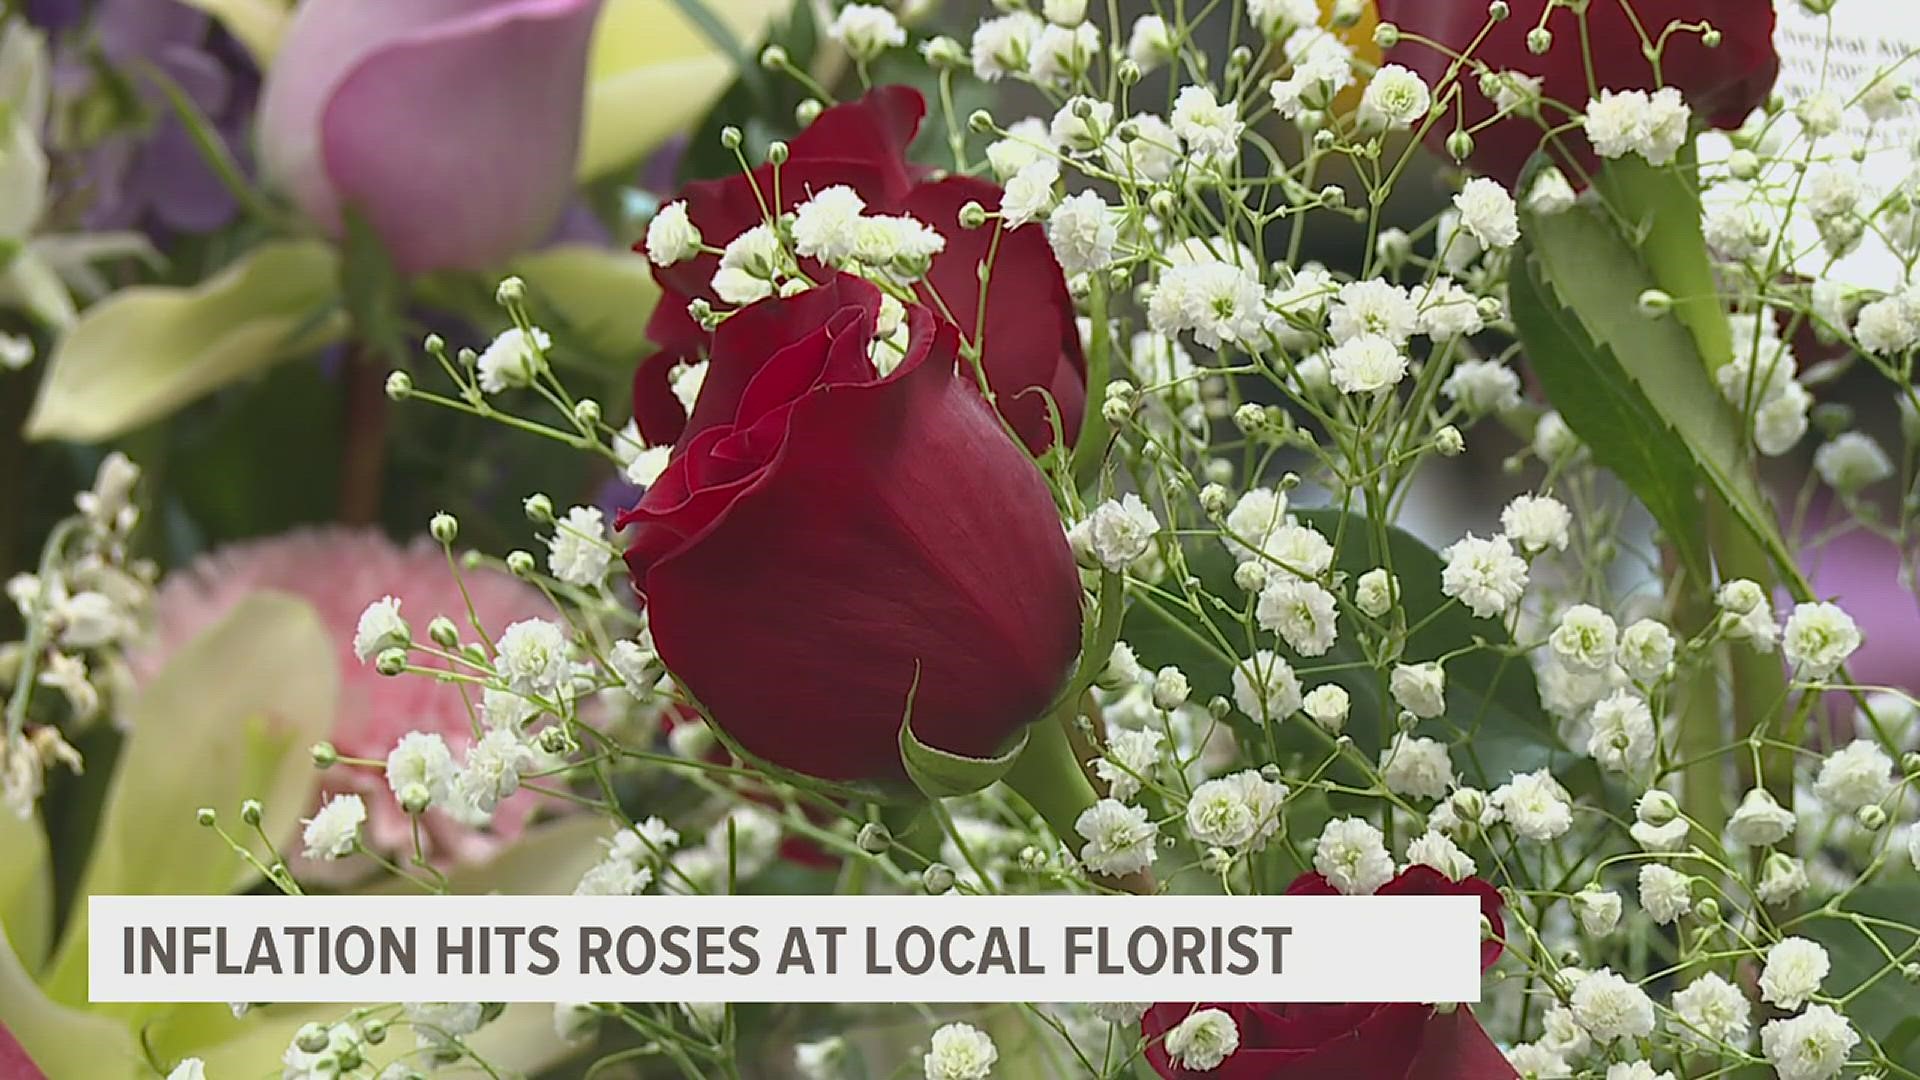 This Valentines season, love is in the air and the wallet, with inflation hitting wholesale roses. But Milan Flower Shop says it won't raise prices for customers.